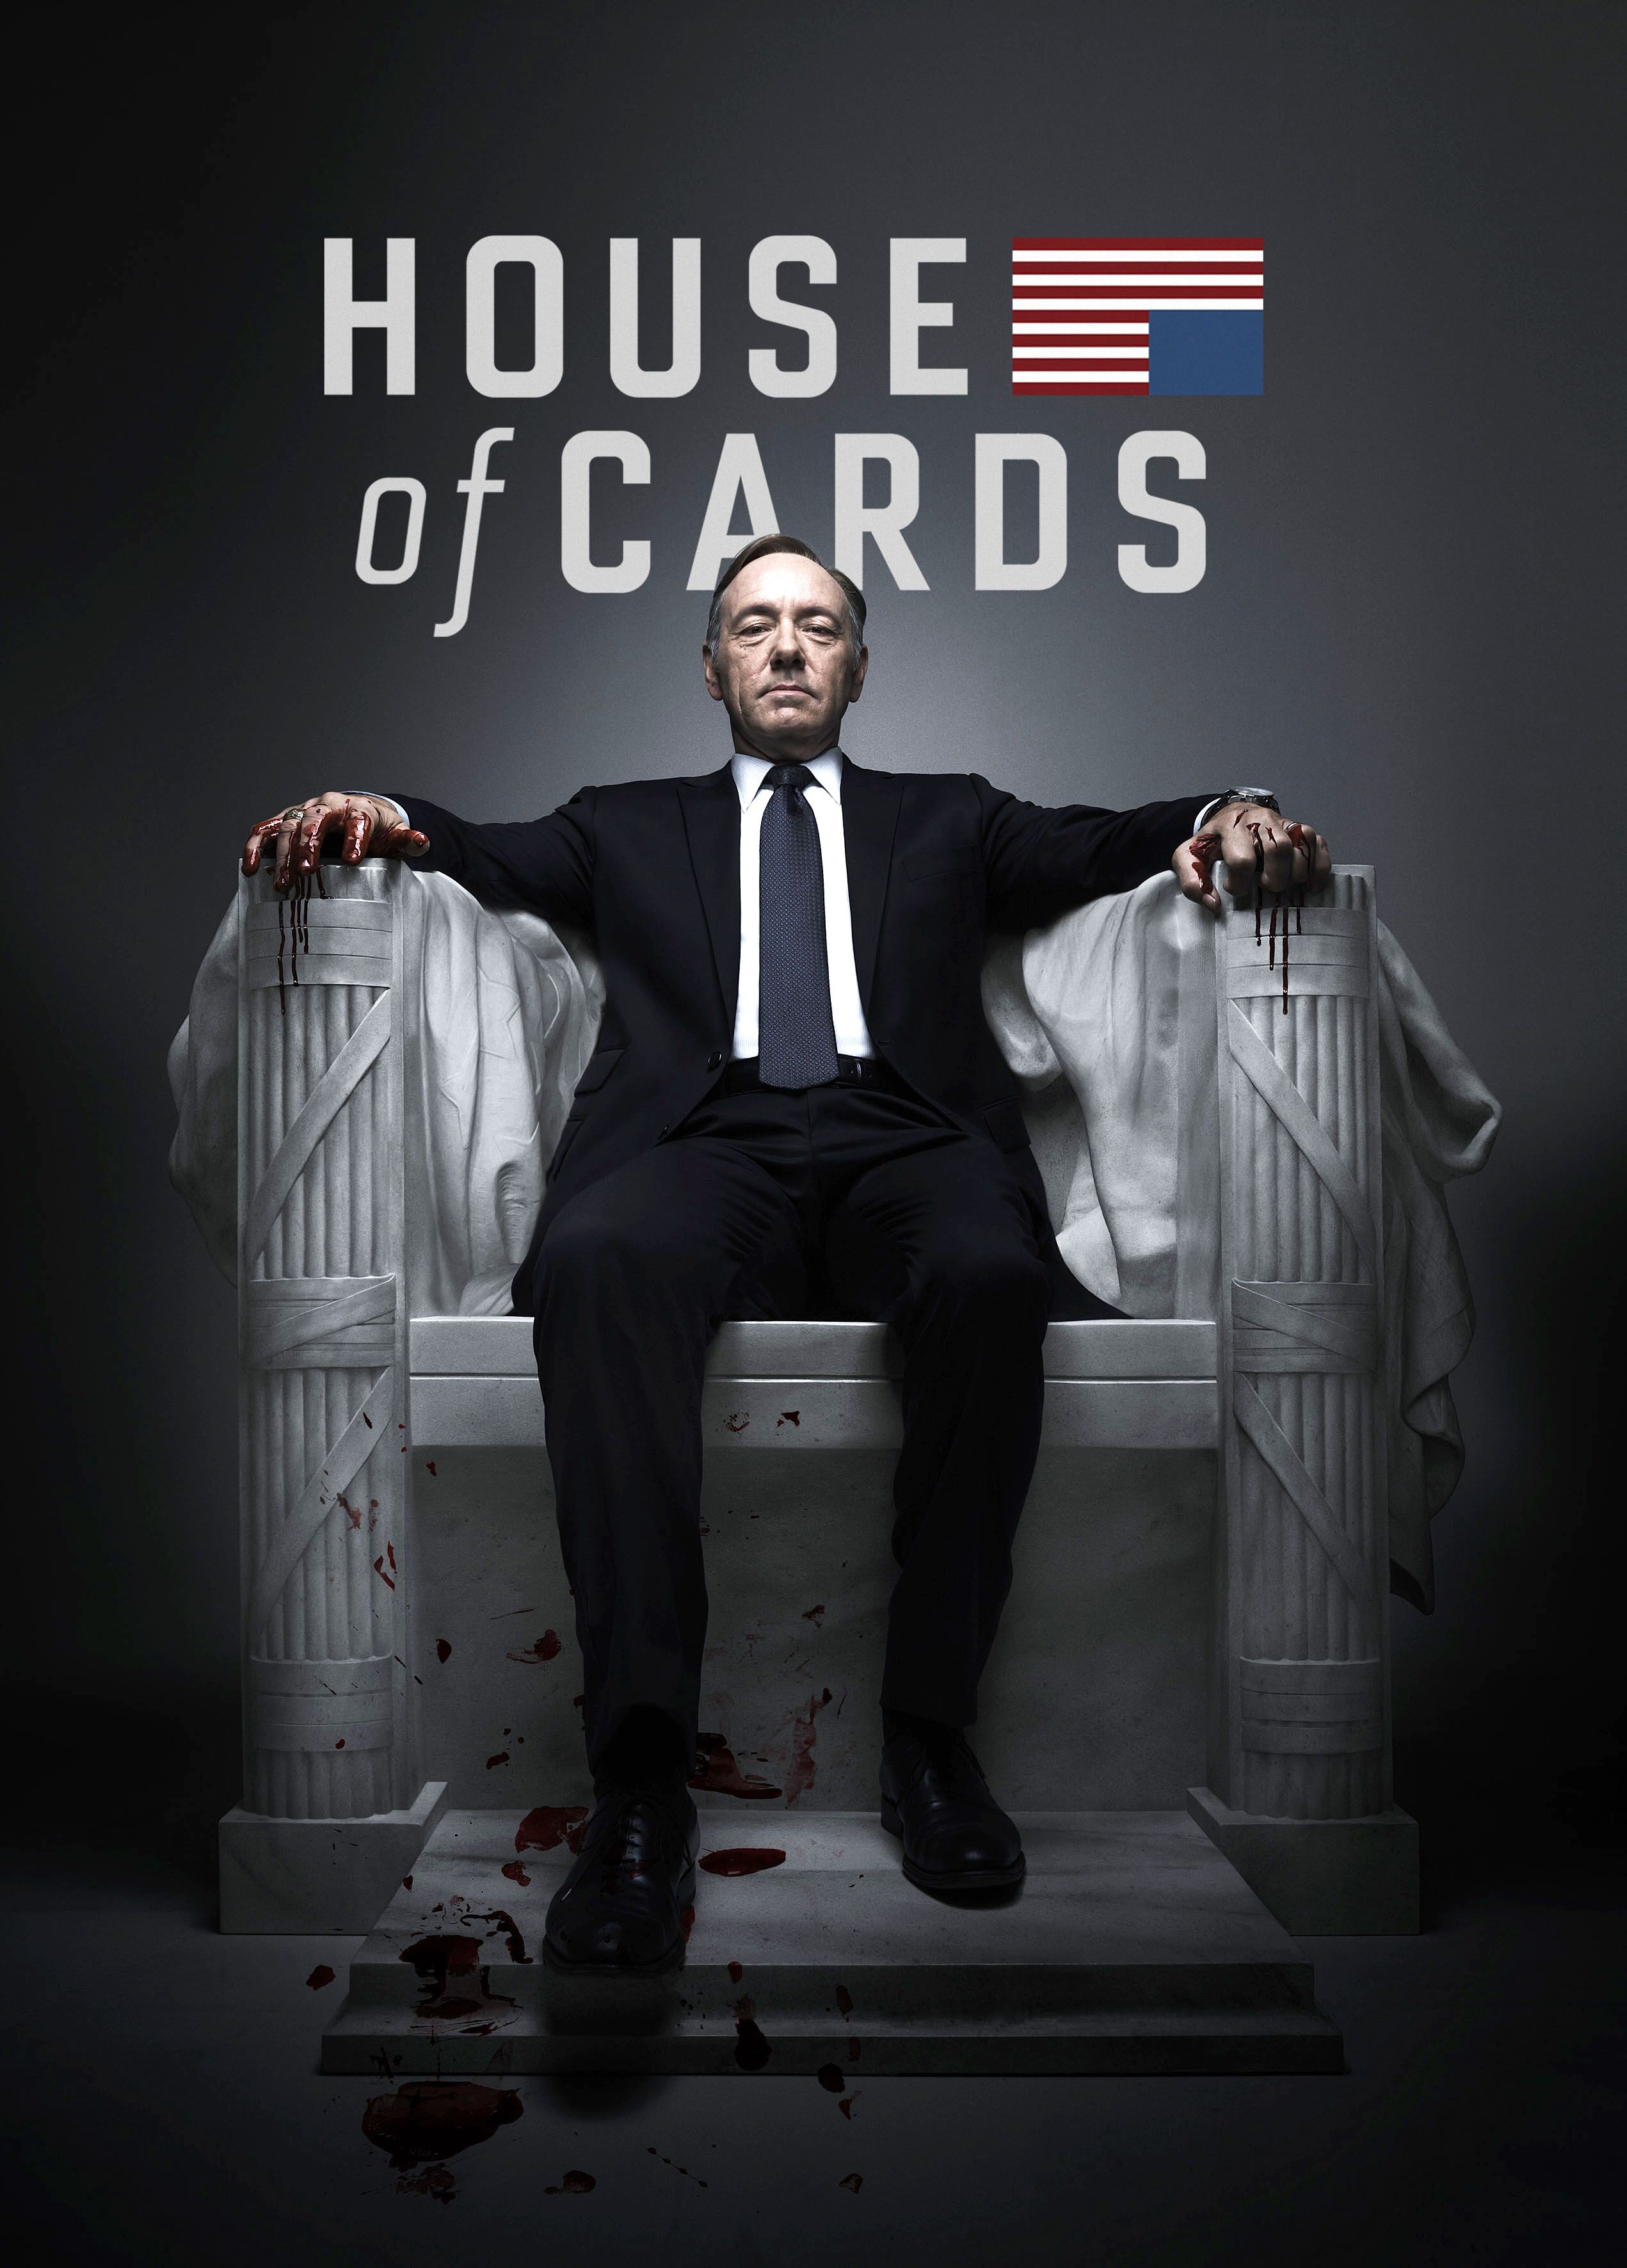 House of Cards (2013)